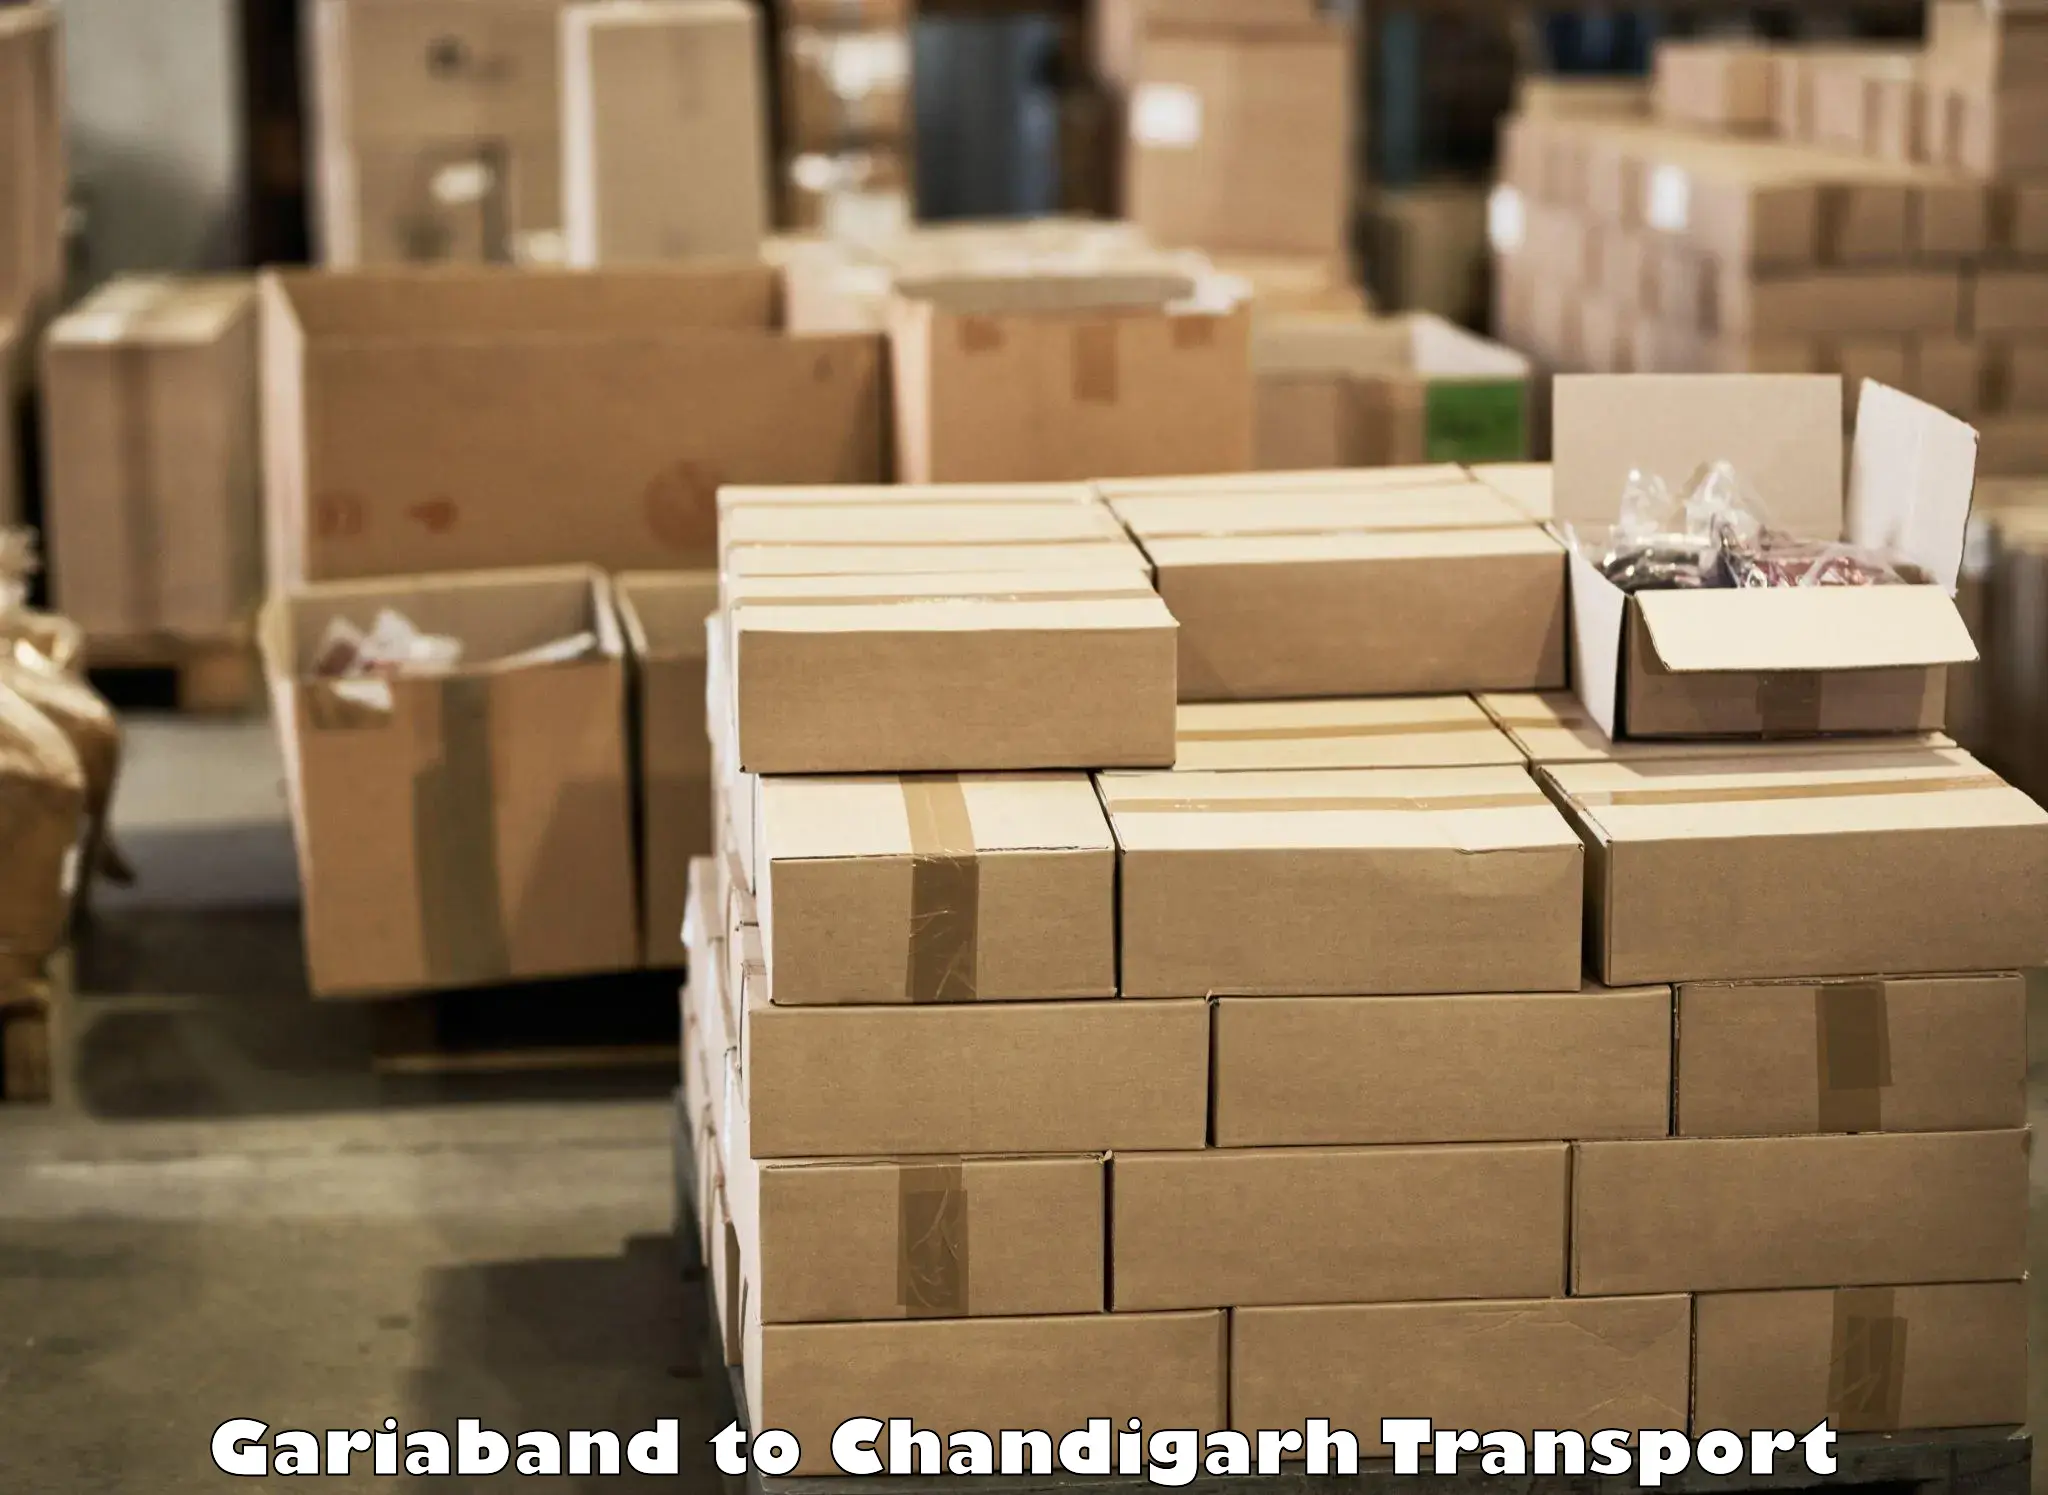 Daily transport service Gariaband to Chandigarh